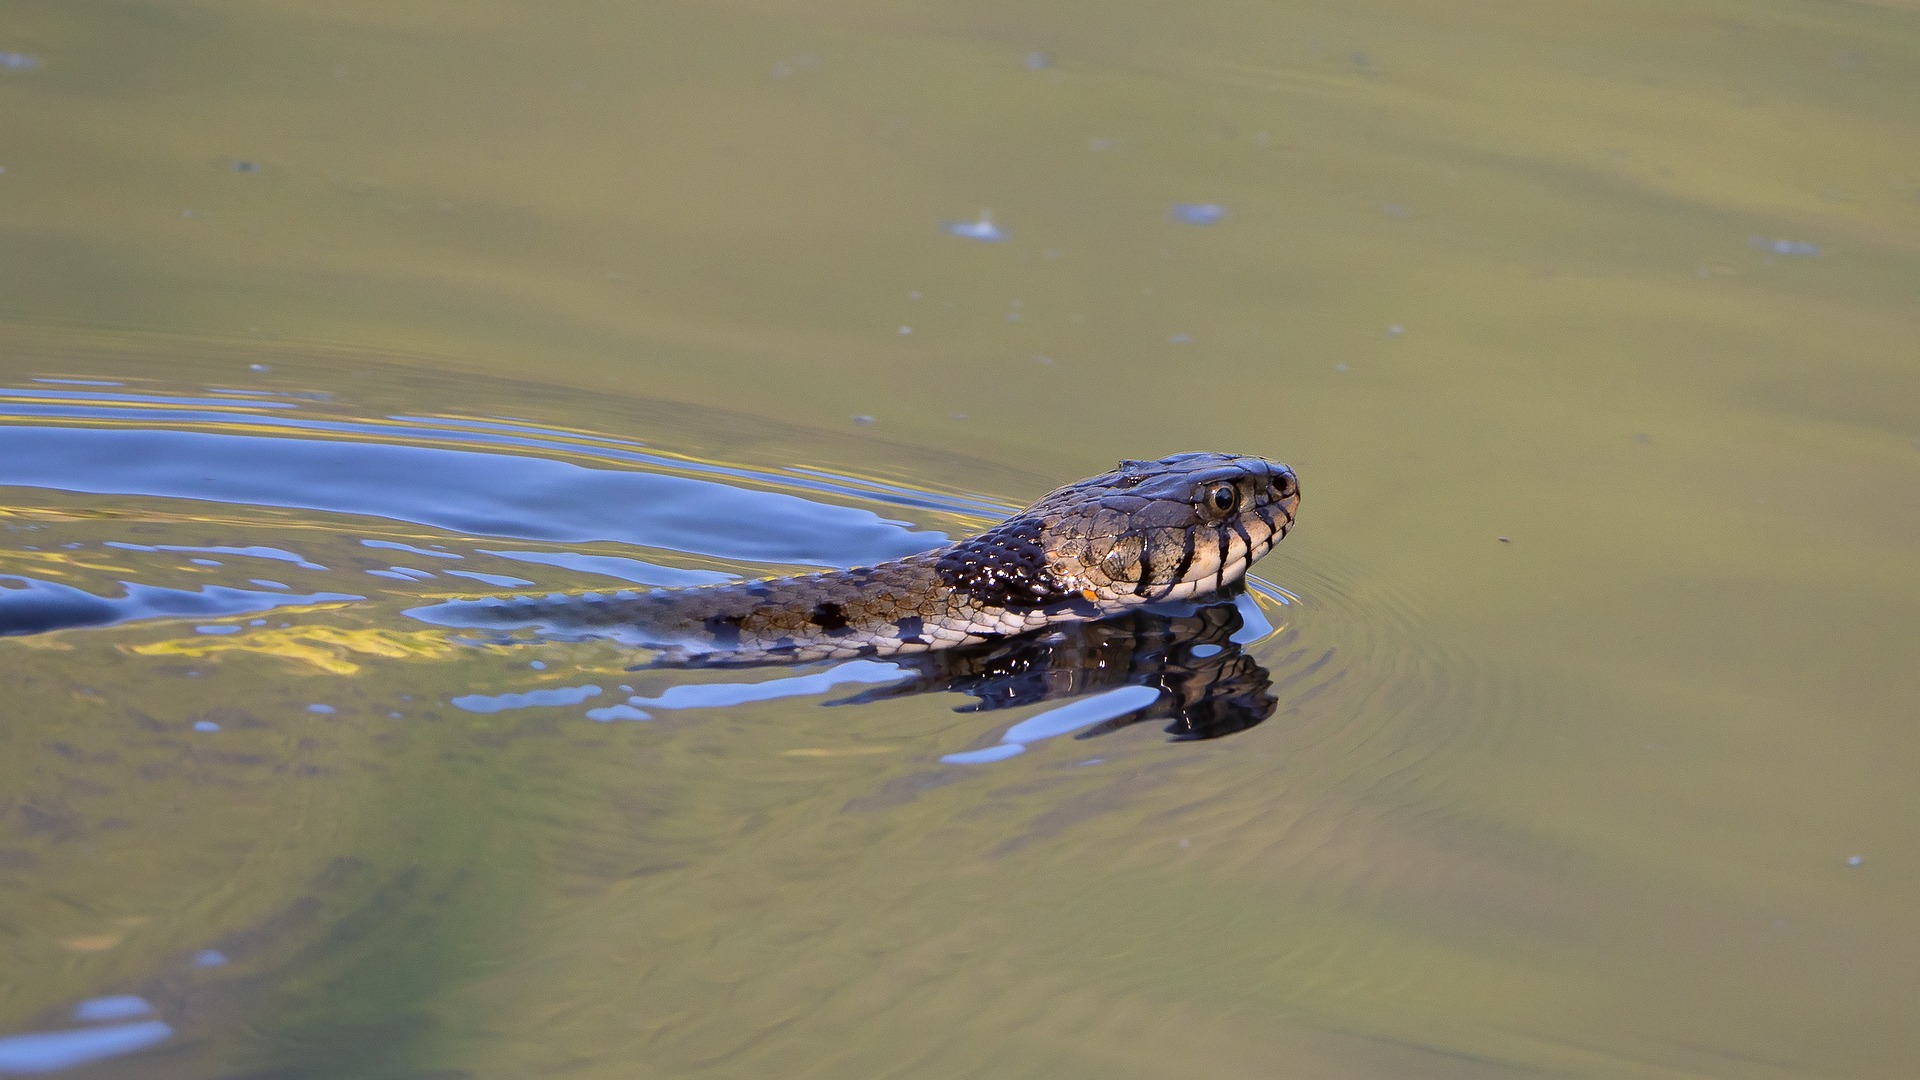 Let's learn all about the water snakes in North Carolina!